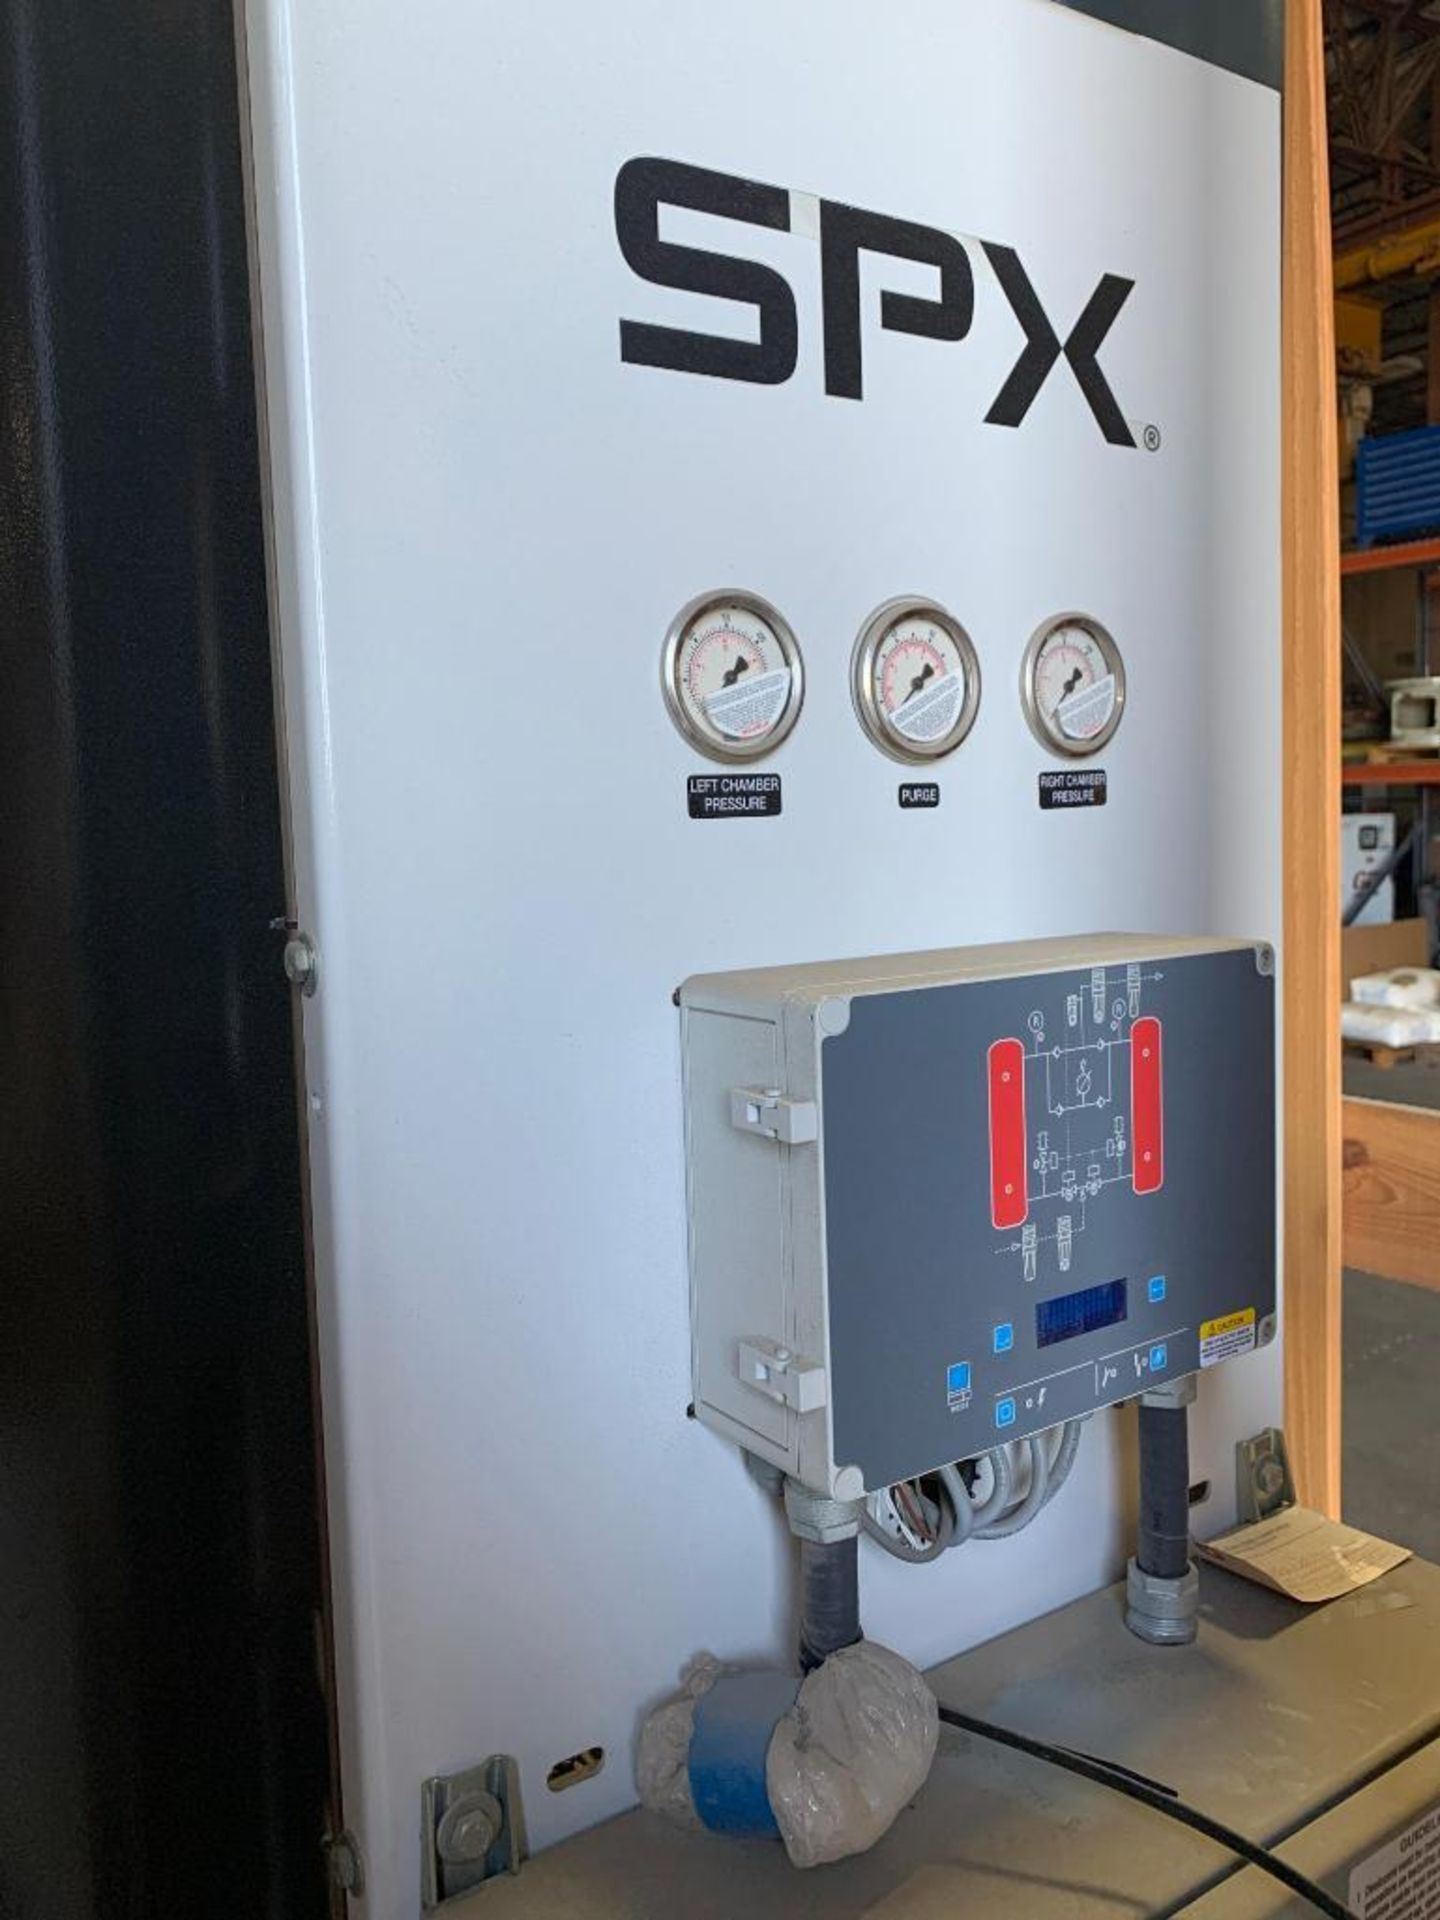 SPX Deltech RP300 Externally Heated Desiccant Air Dryer 2014 - Image 3 of 6